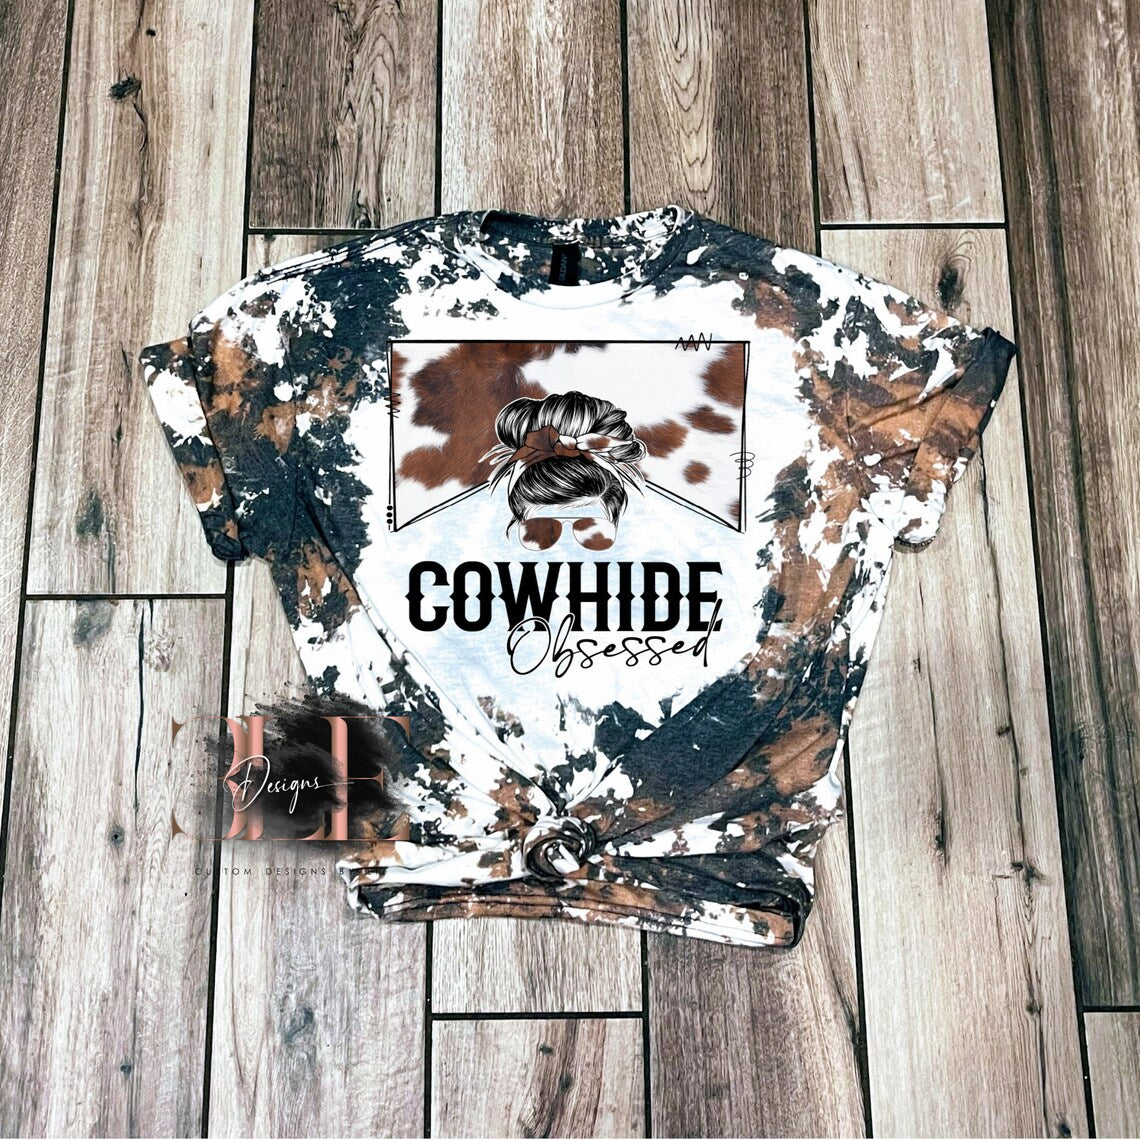 Cowhide Obsessed Bleached Sublimation T-shirt, Cow Lover Bleached Tee, Farm Country Girl Shirt, Gift Ideas for Women, Cow Print T-Shirt